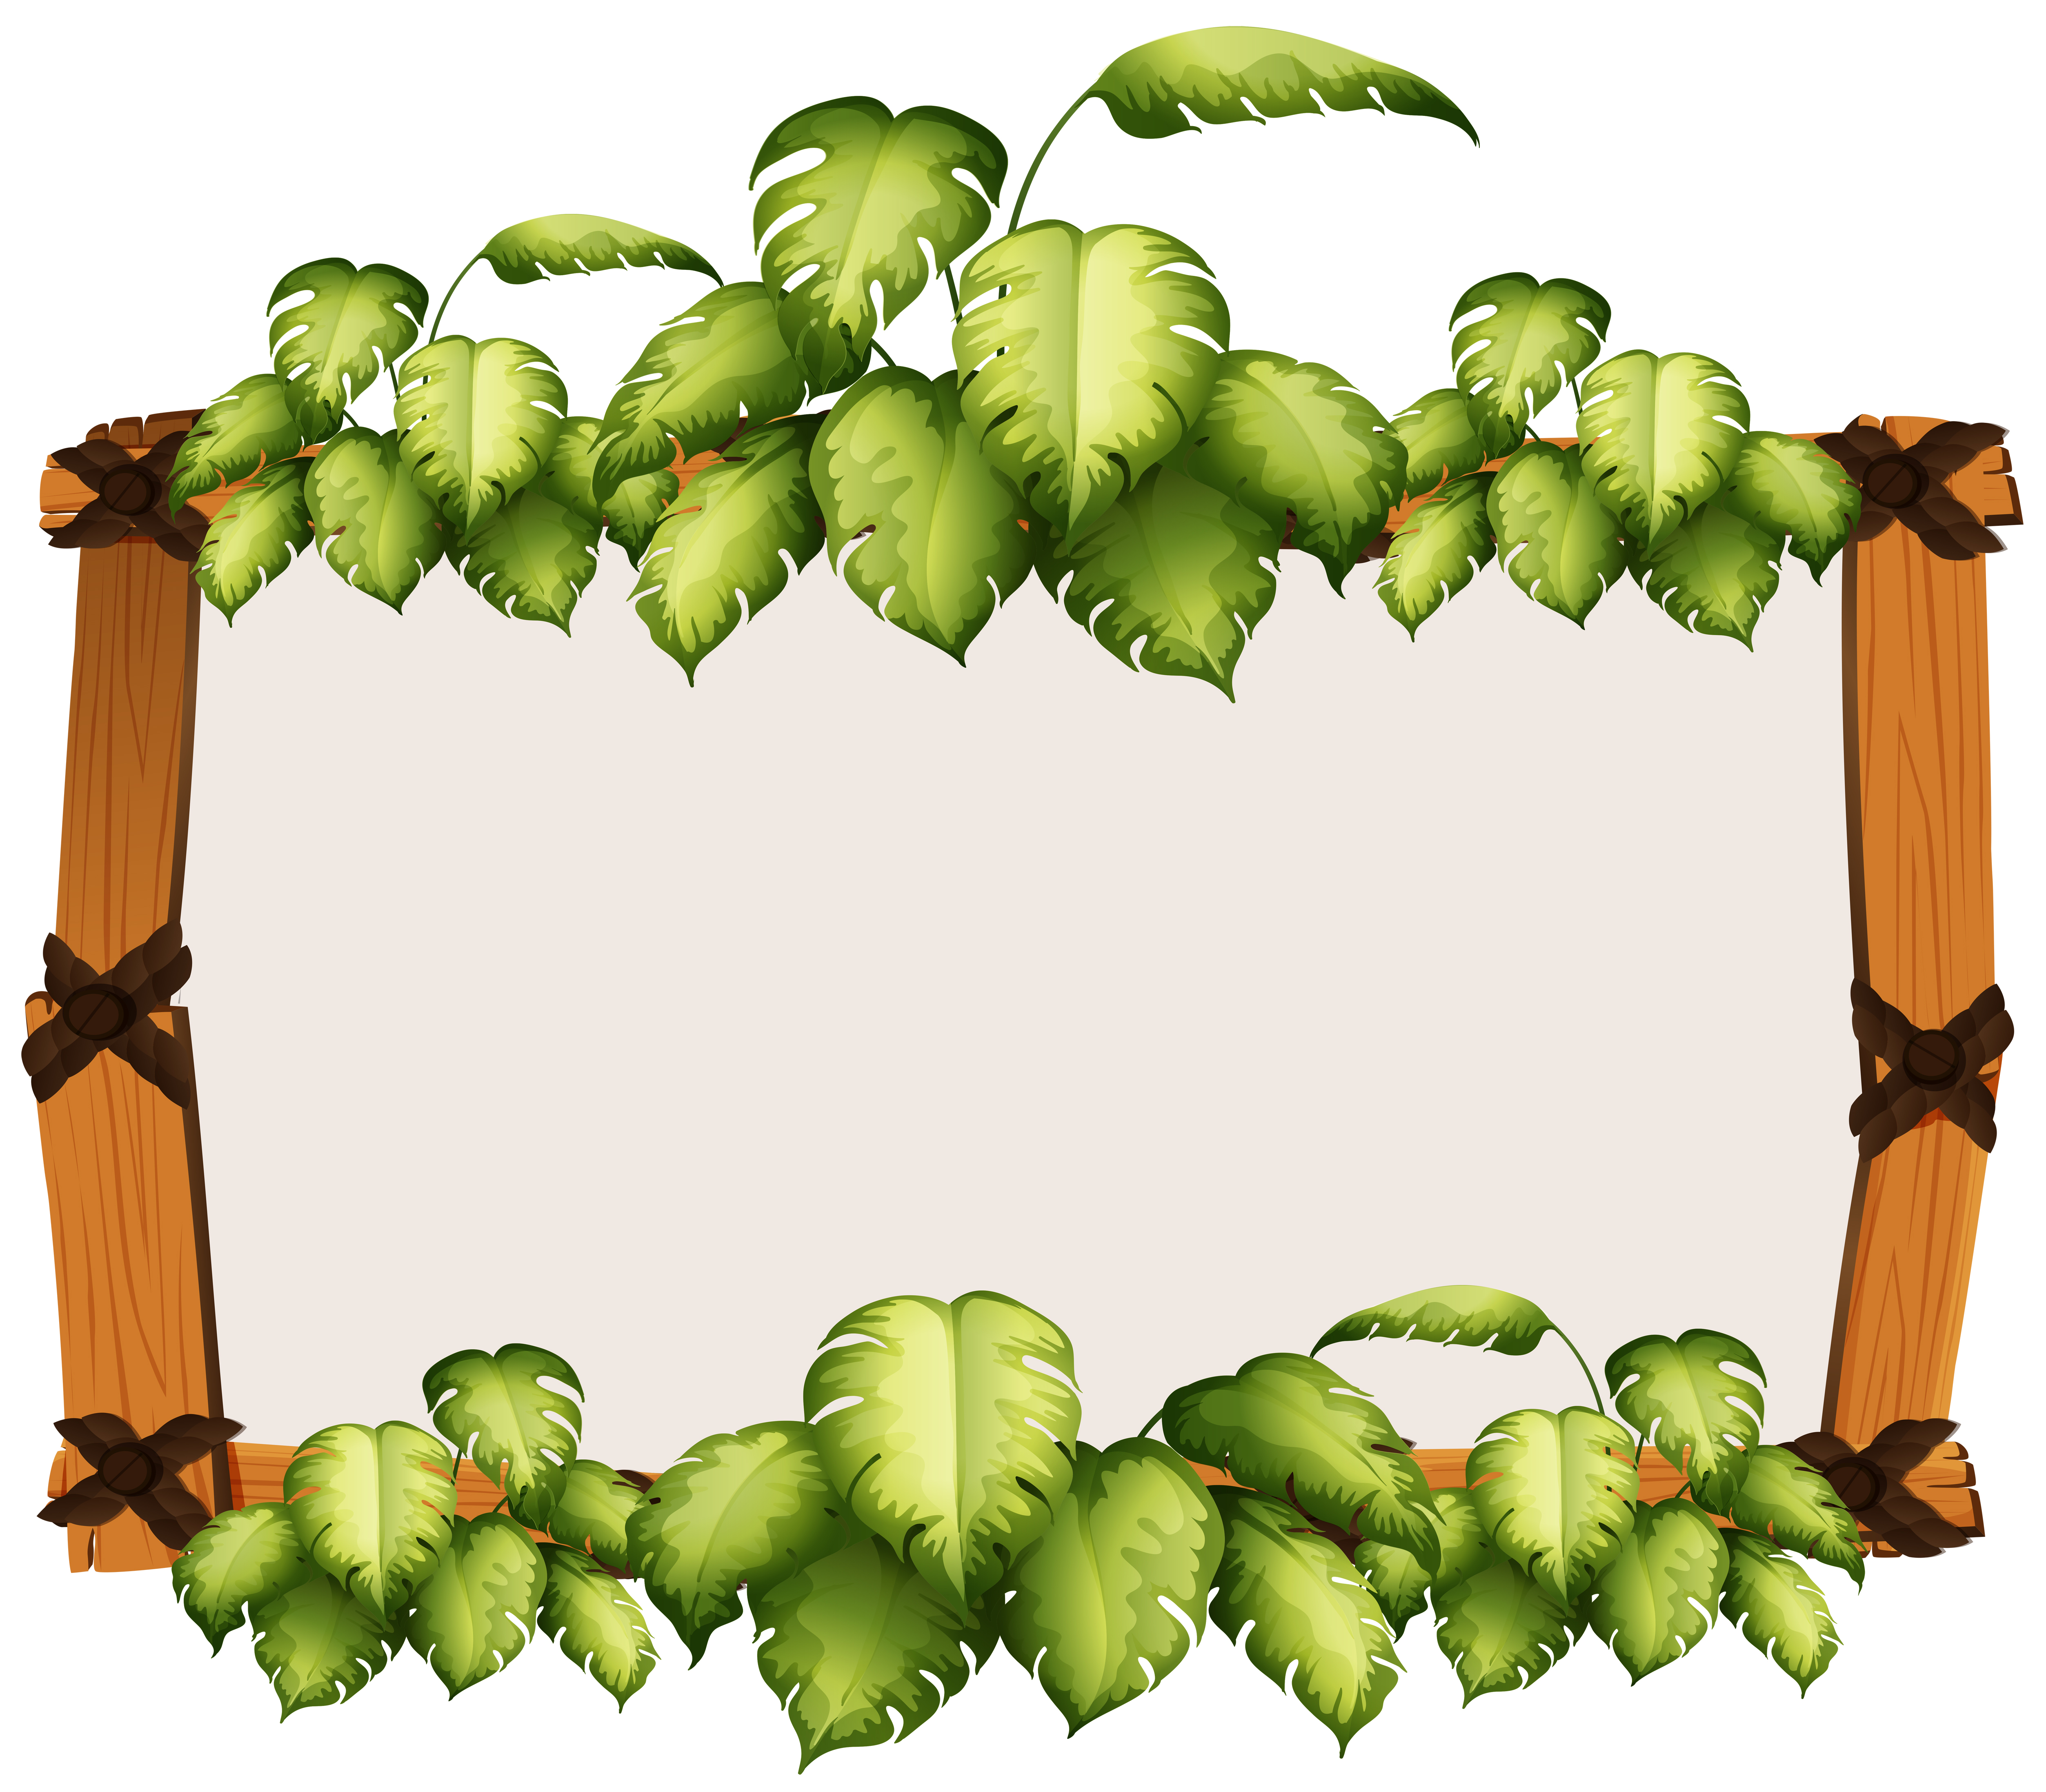 Border template with woods and leaves - Download Free ...